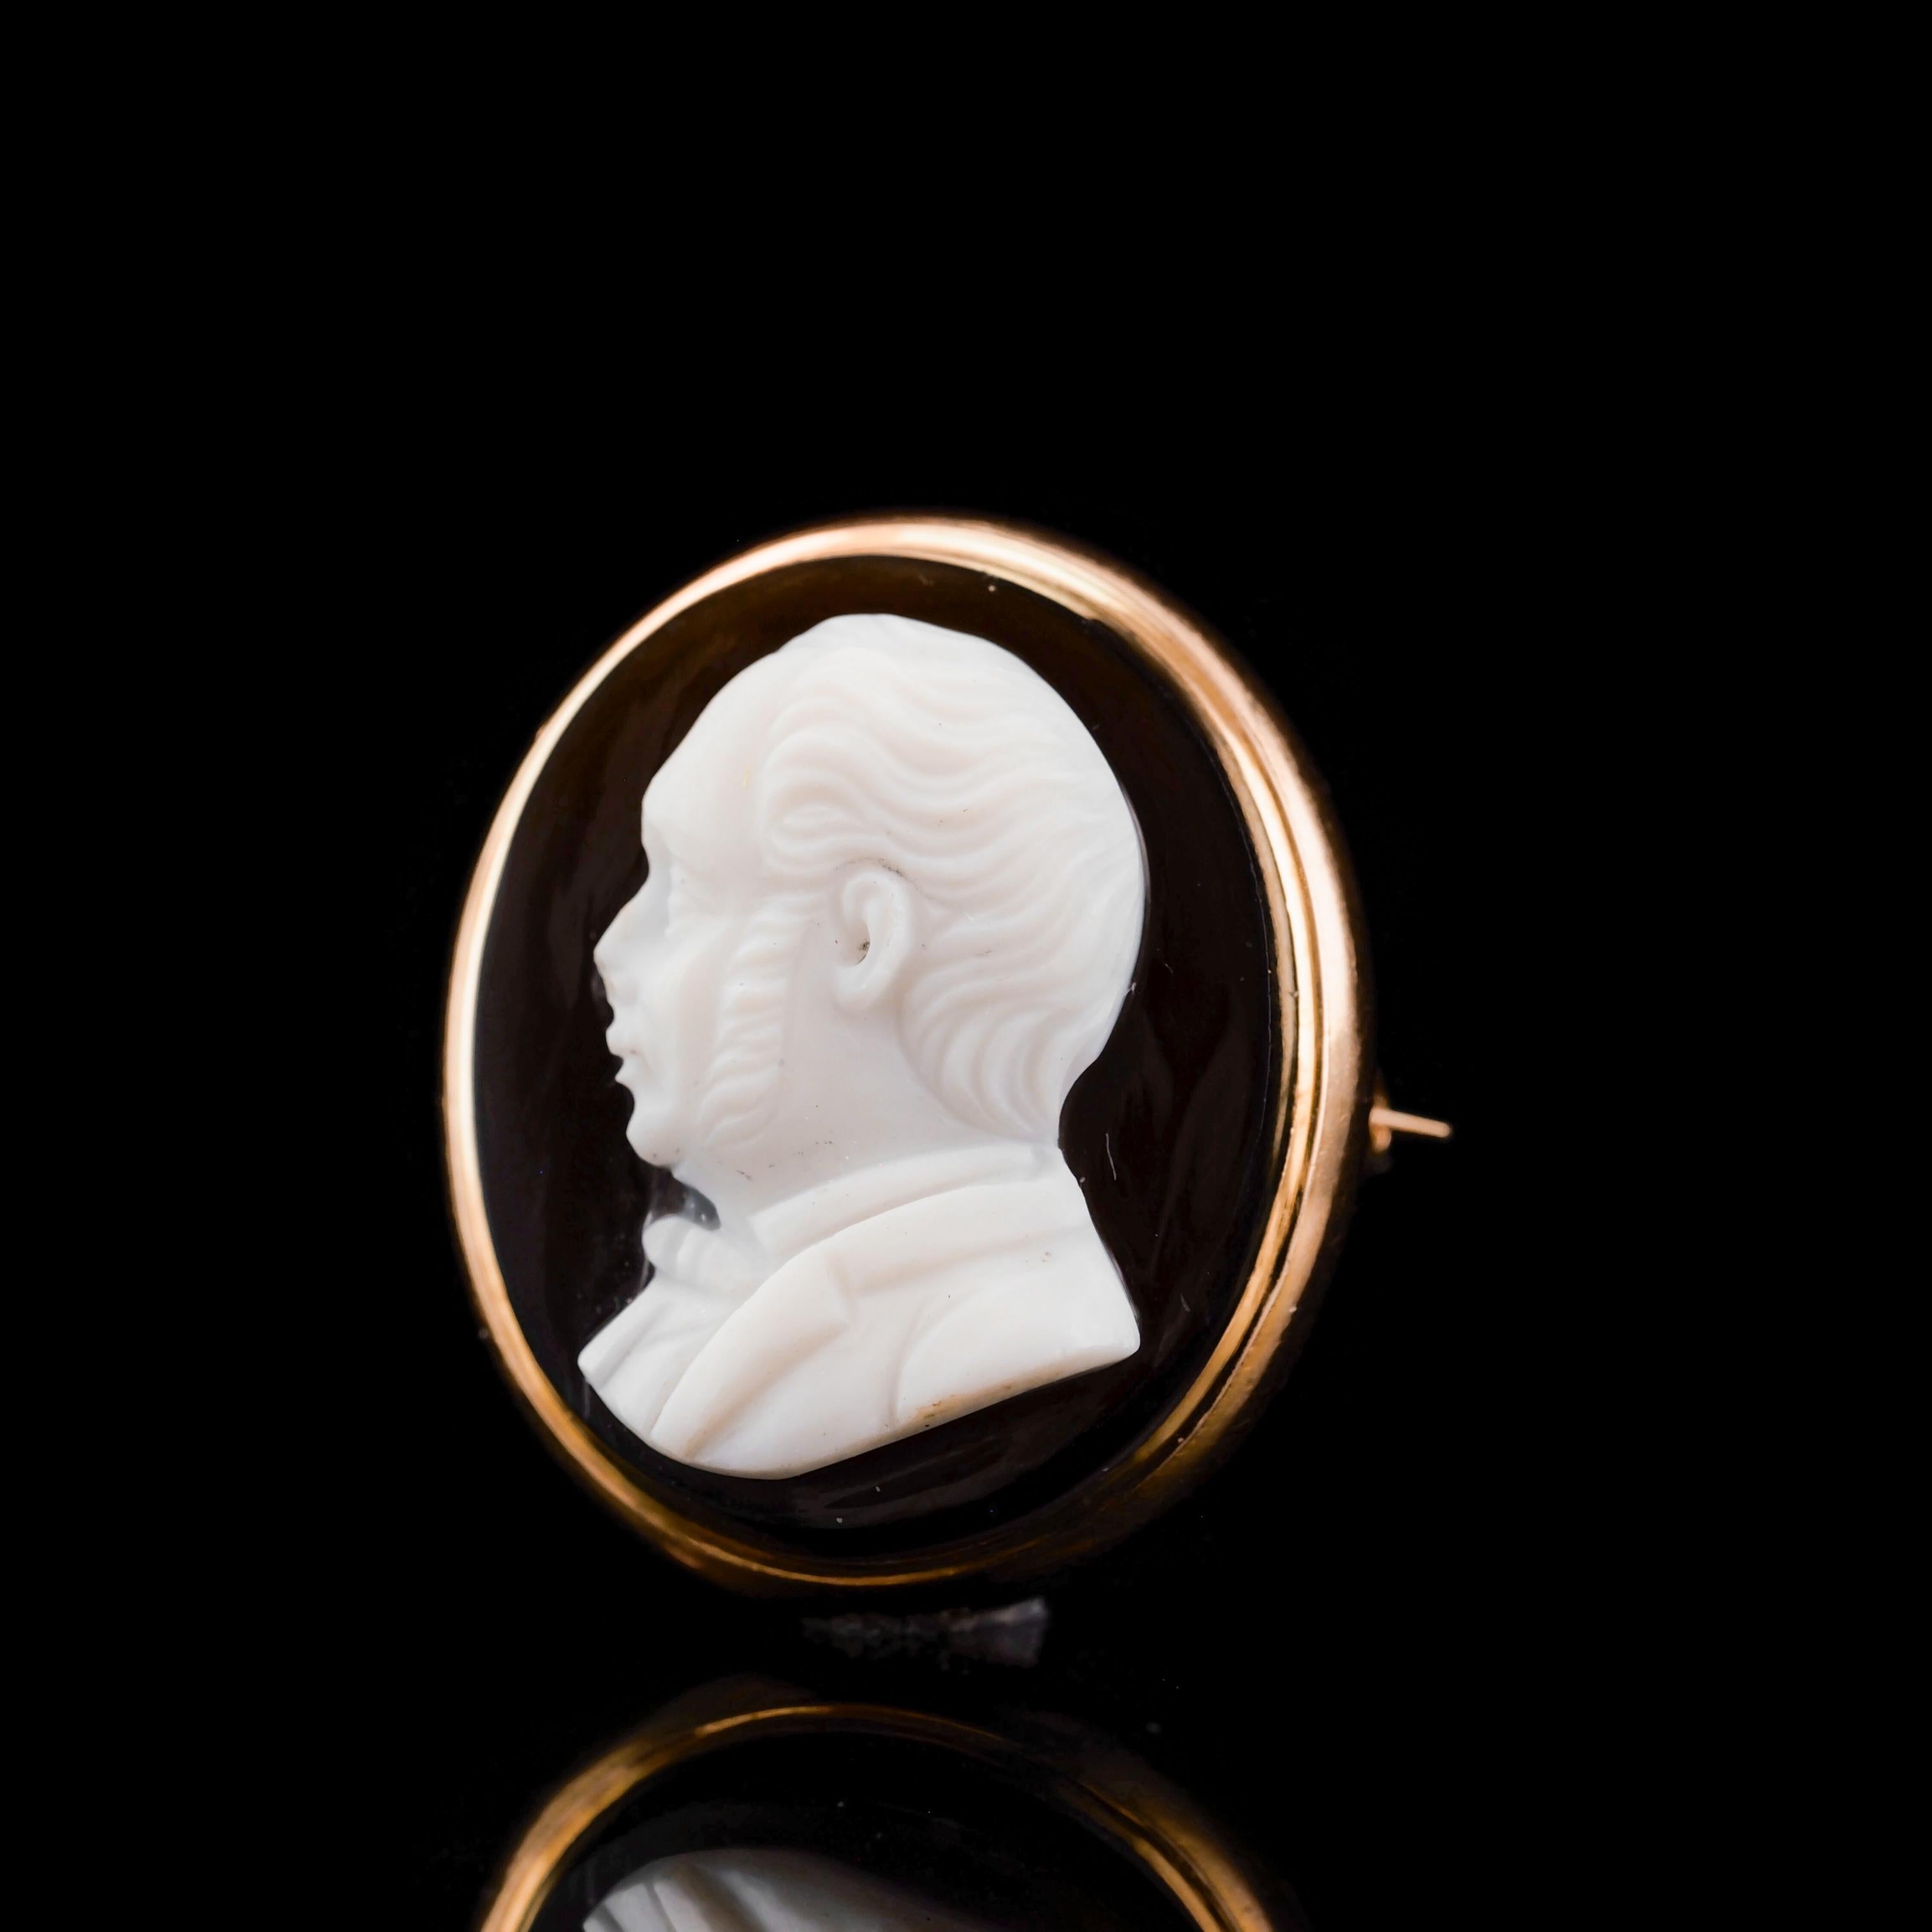 We are delighted to offer this wonderful 15ct gold Georgian or Victorian hardstone cameo made around the bordering period of late Georgian to Early Victorian c.1830-40s. 
 
The cameo features a side profile of a Georgian gentleman which is